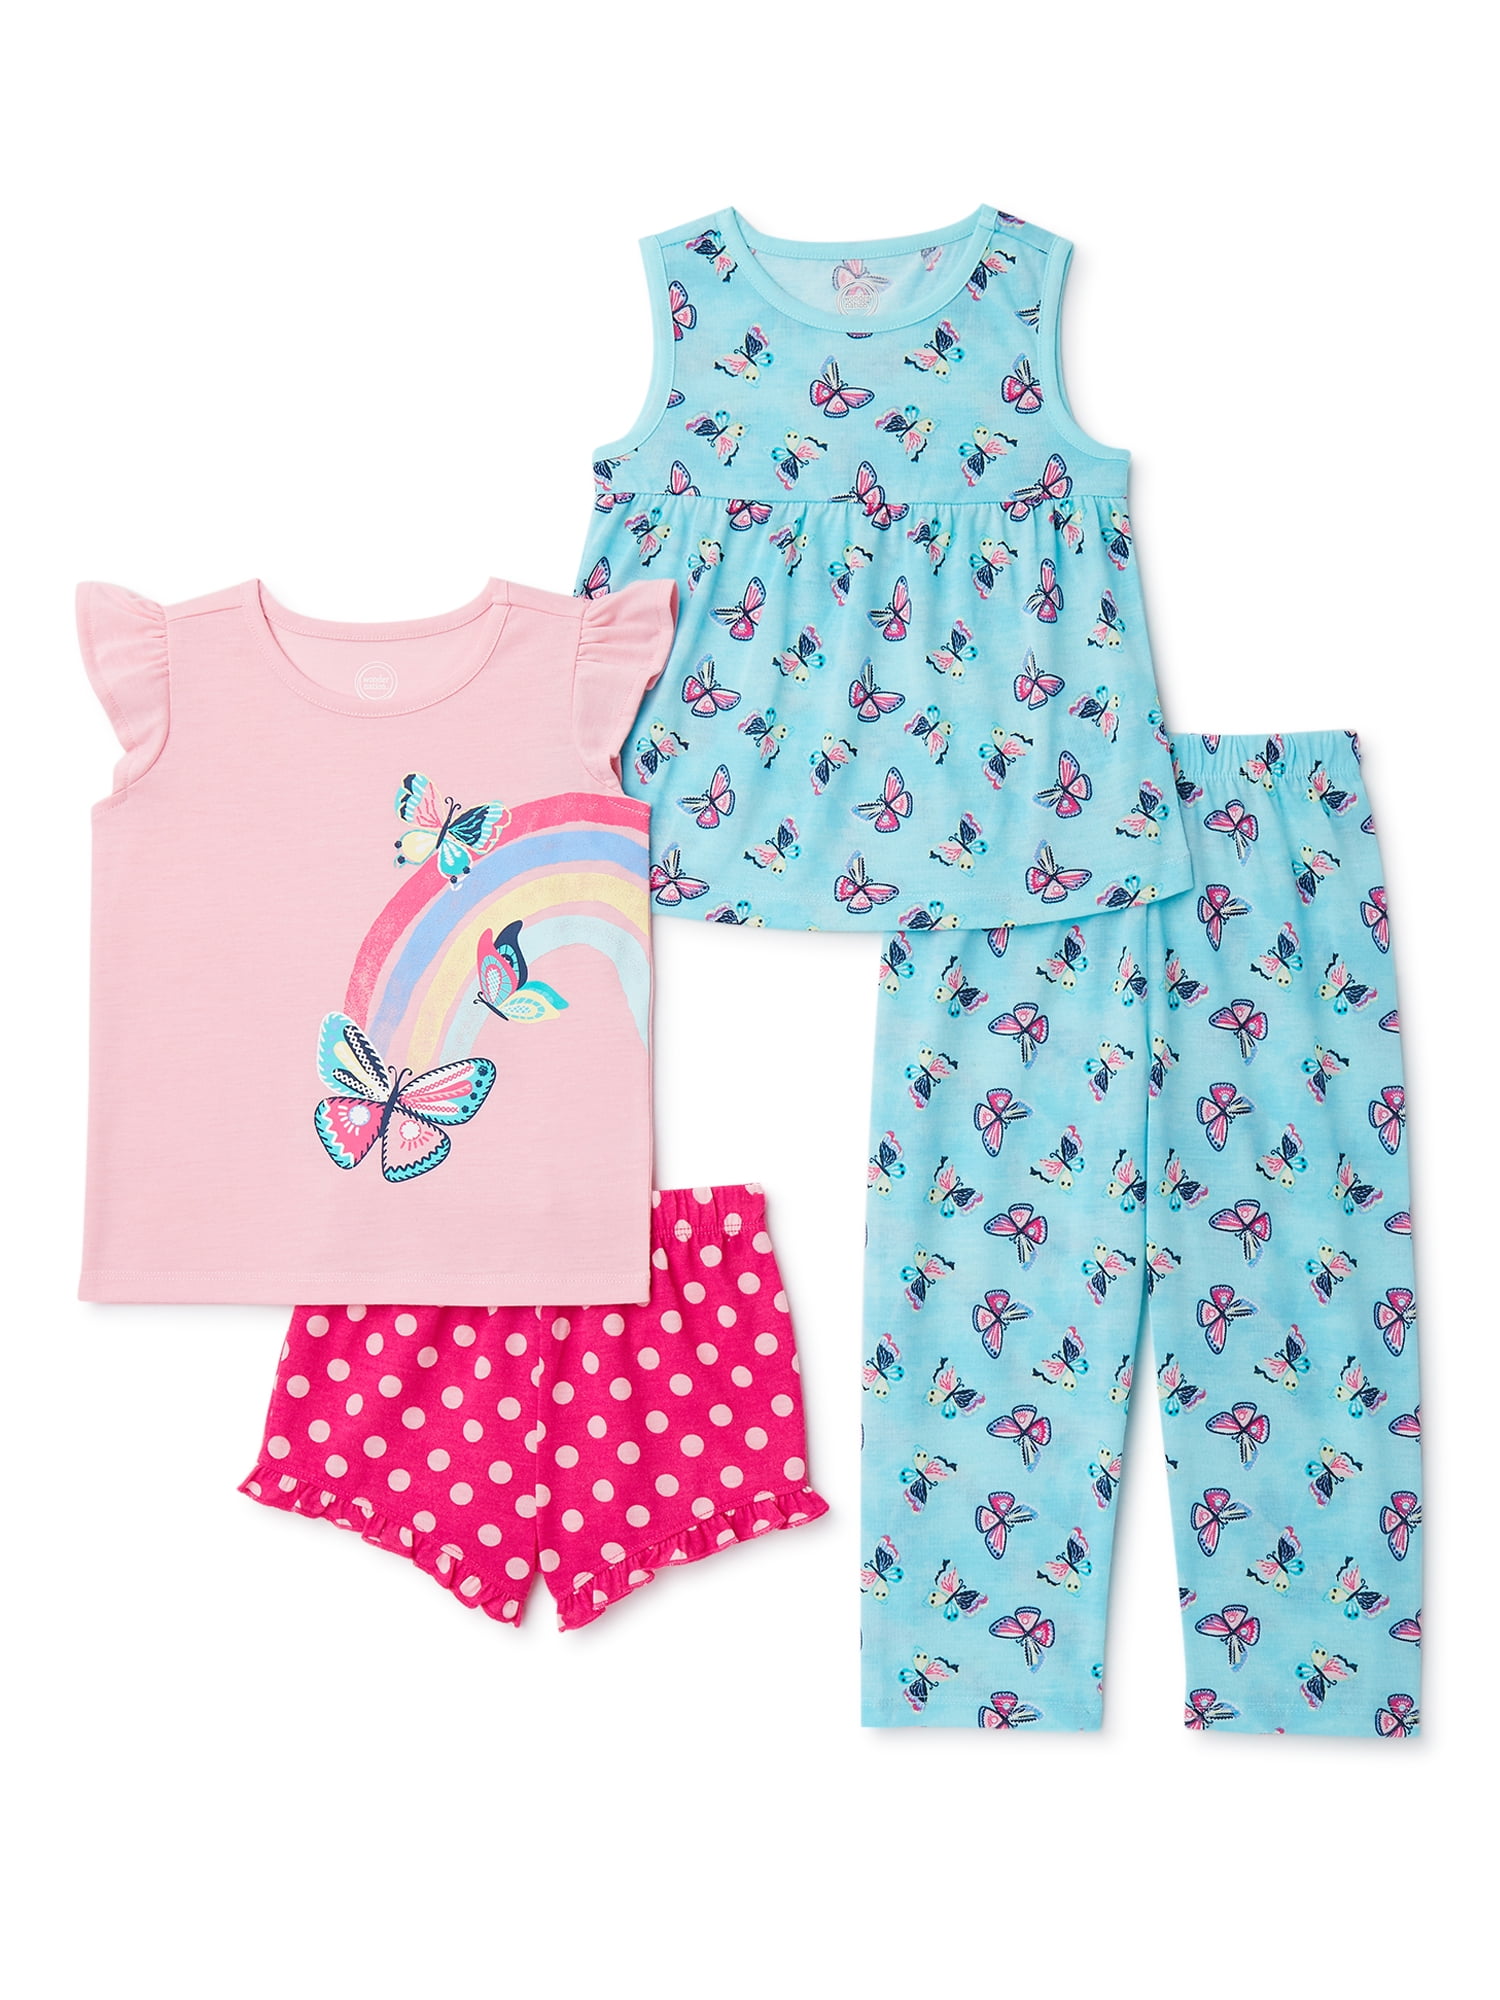 WONDER NATION 2 PIECE PAJAMA SET   SIZE 24 MONTHS  NEW WITH TAGS  ROBOT 